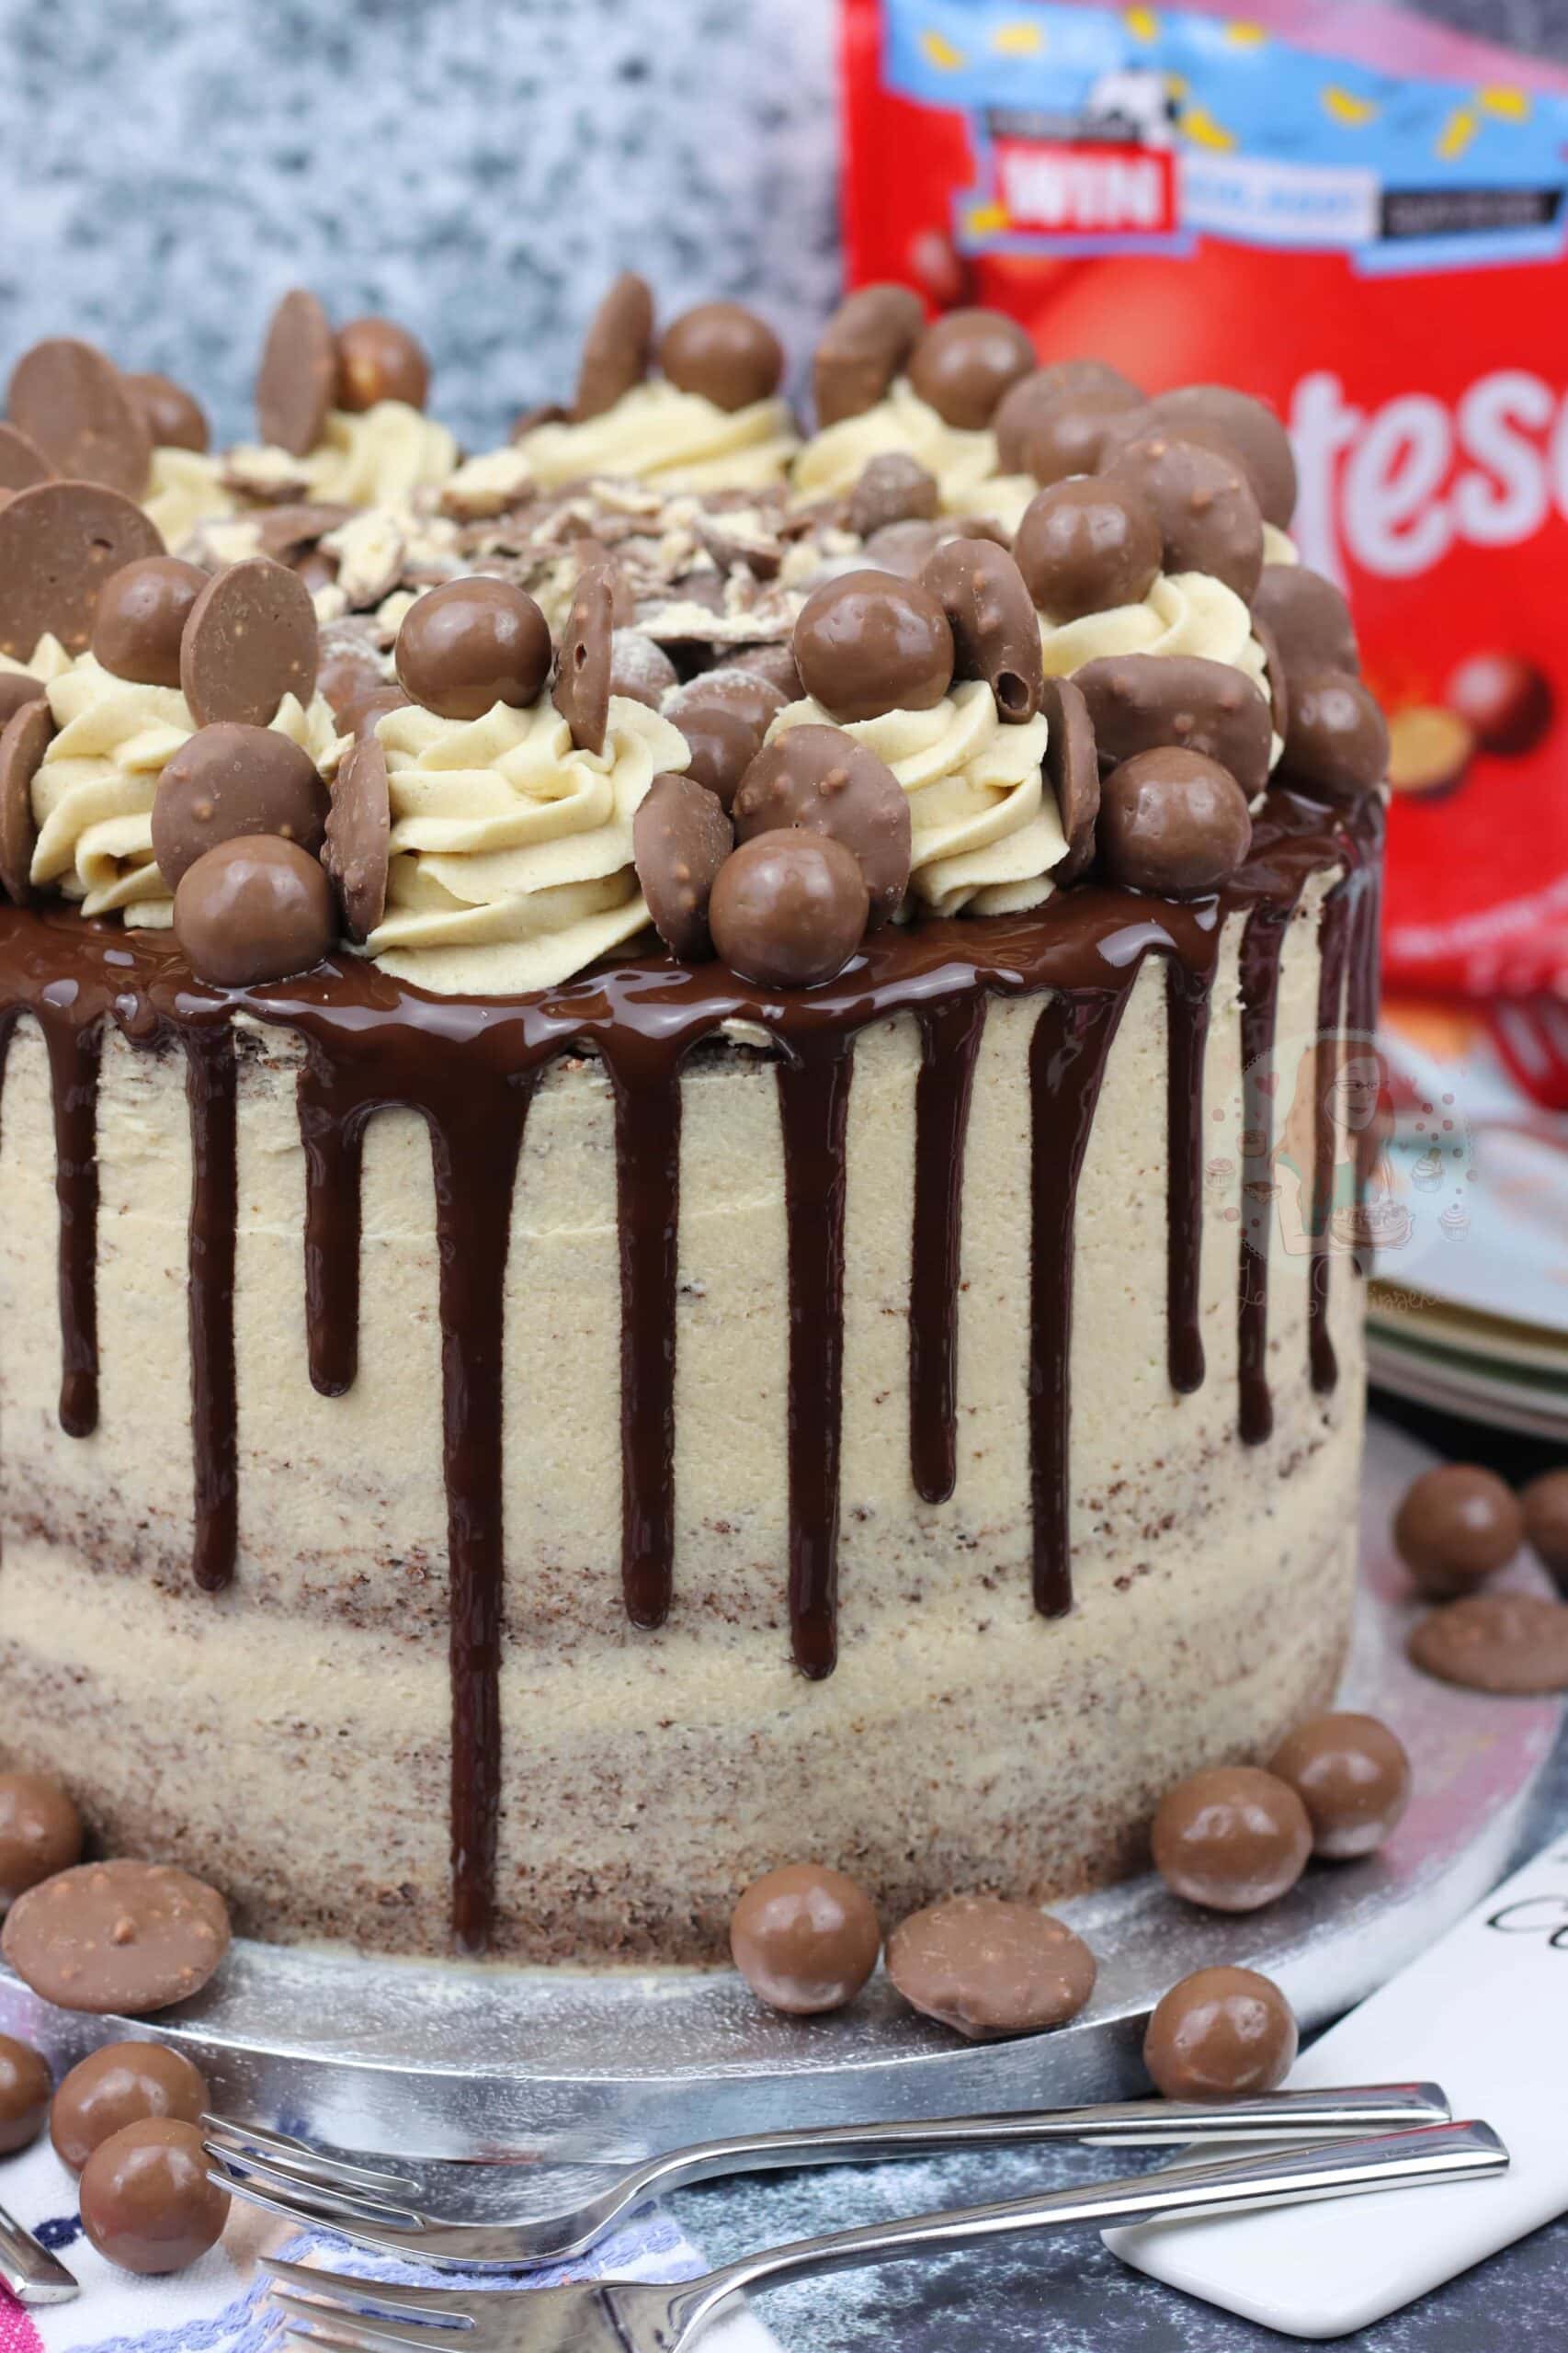 Tesco is selling chocolate traybake topped with M&Ms, Maltesers